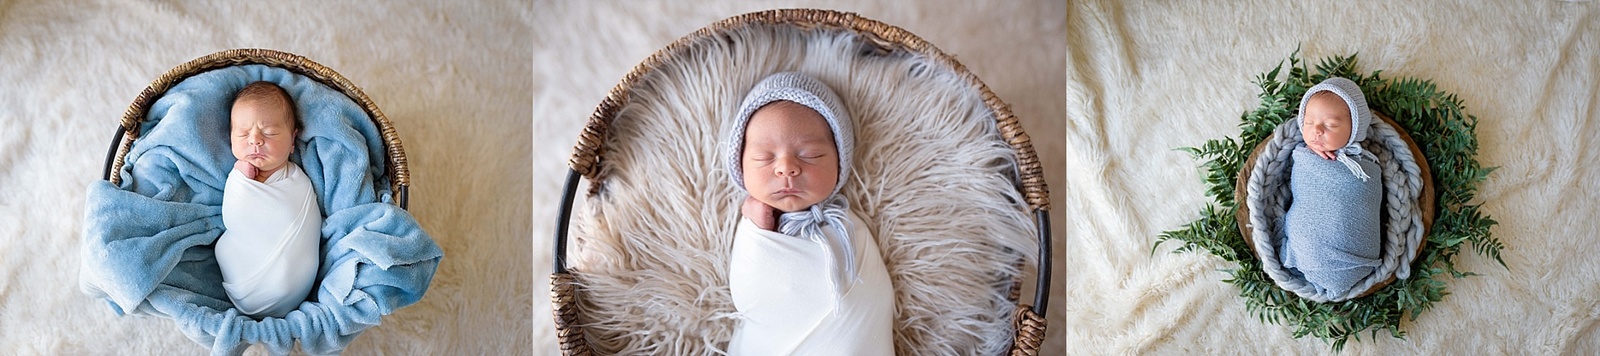 baby rest his head on his hand for newborn photo palos verdes ca